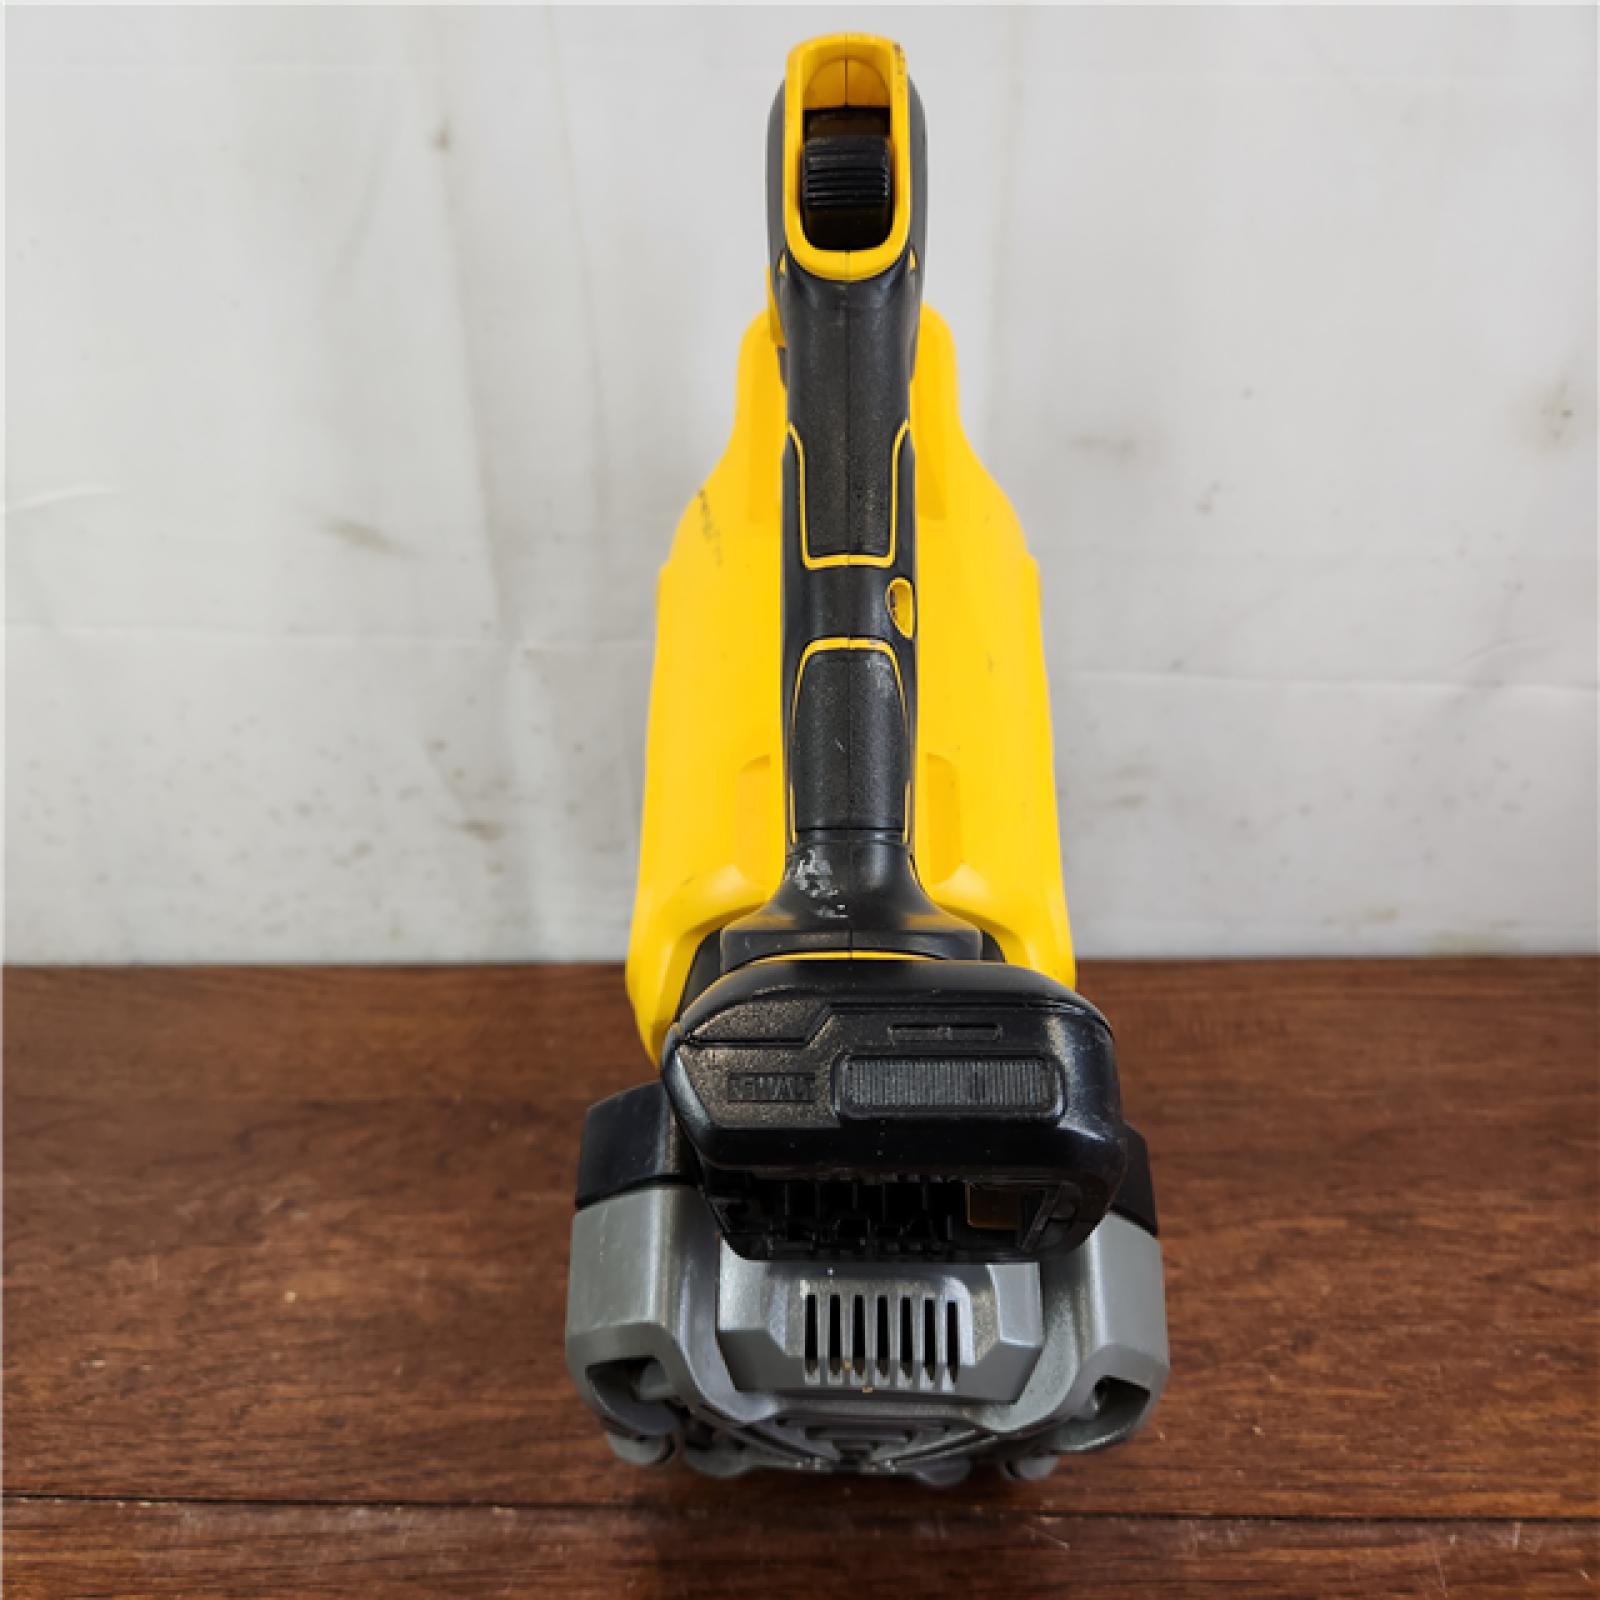 AS-IS Dewalt 125 MPH 450 CFM 20-Volt MAX Cordless Brushless Handheld Blower (Tool-Only)